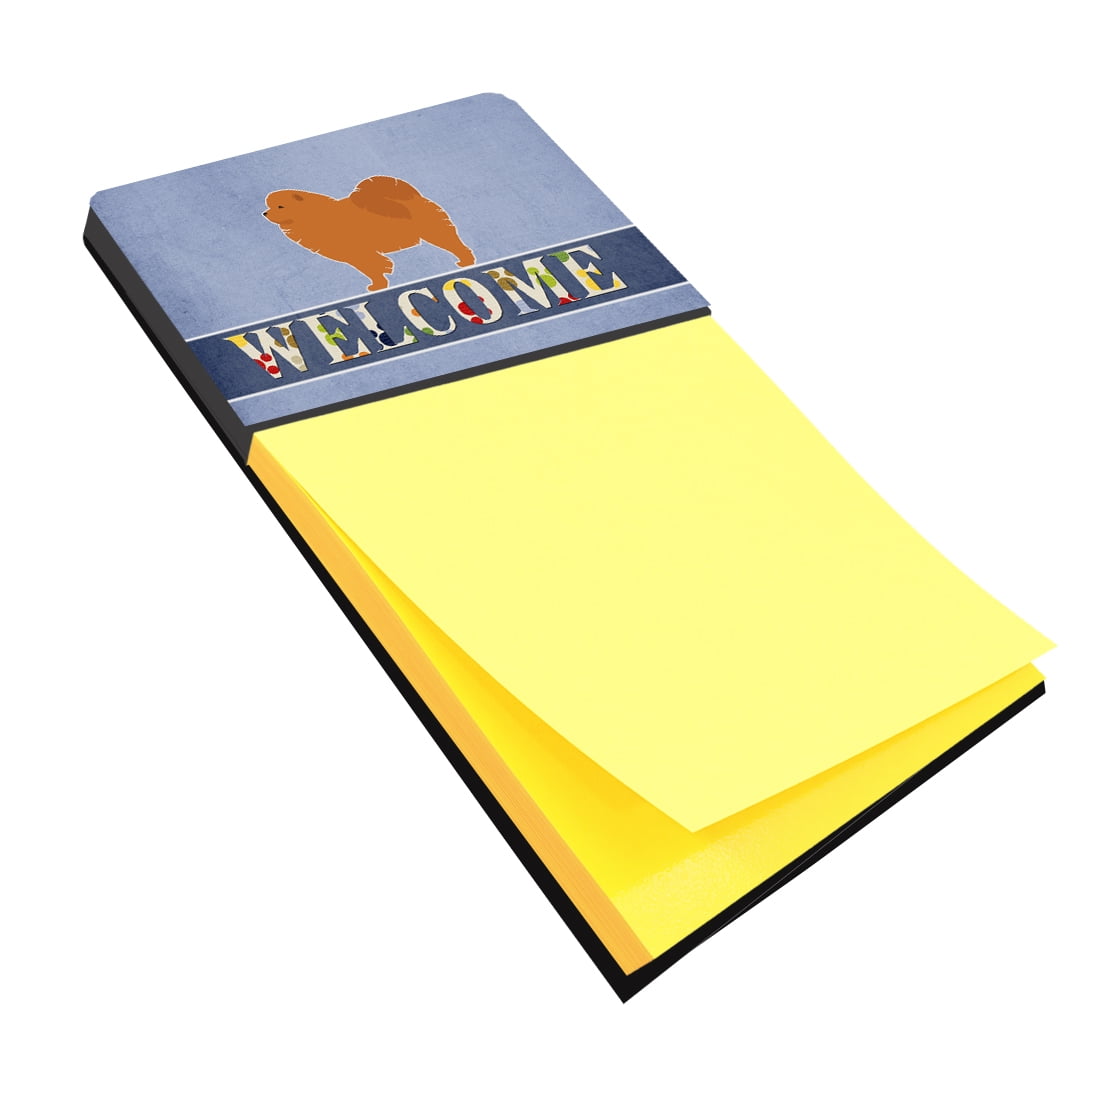 Bb5555sn Chow Chow Welcome Sticky Note Holder